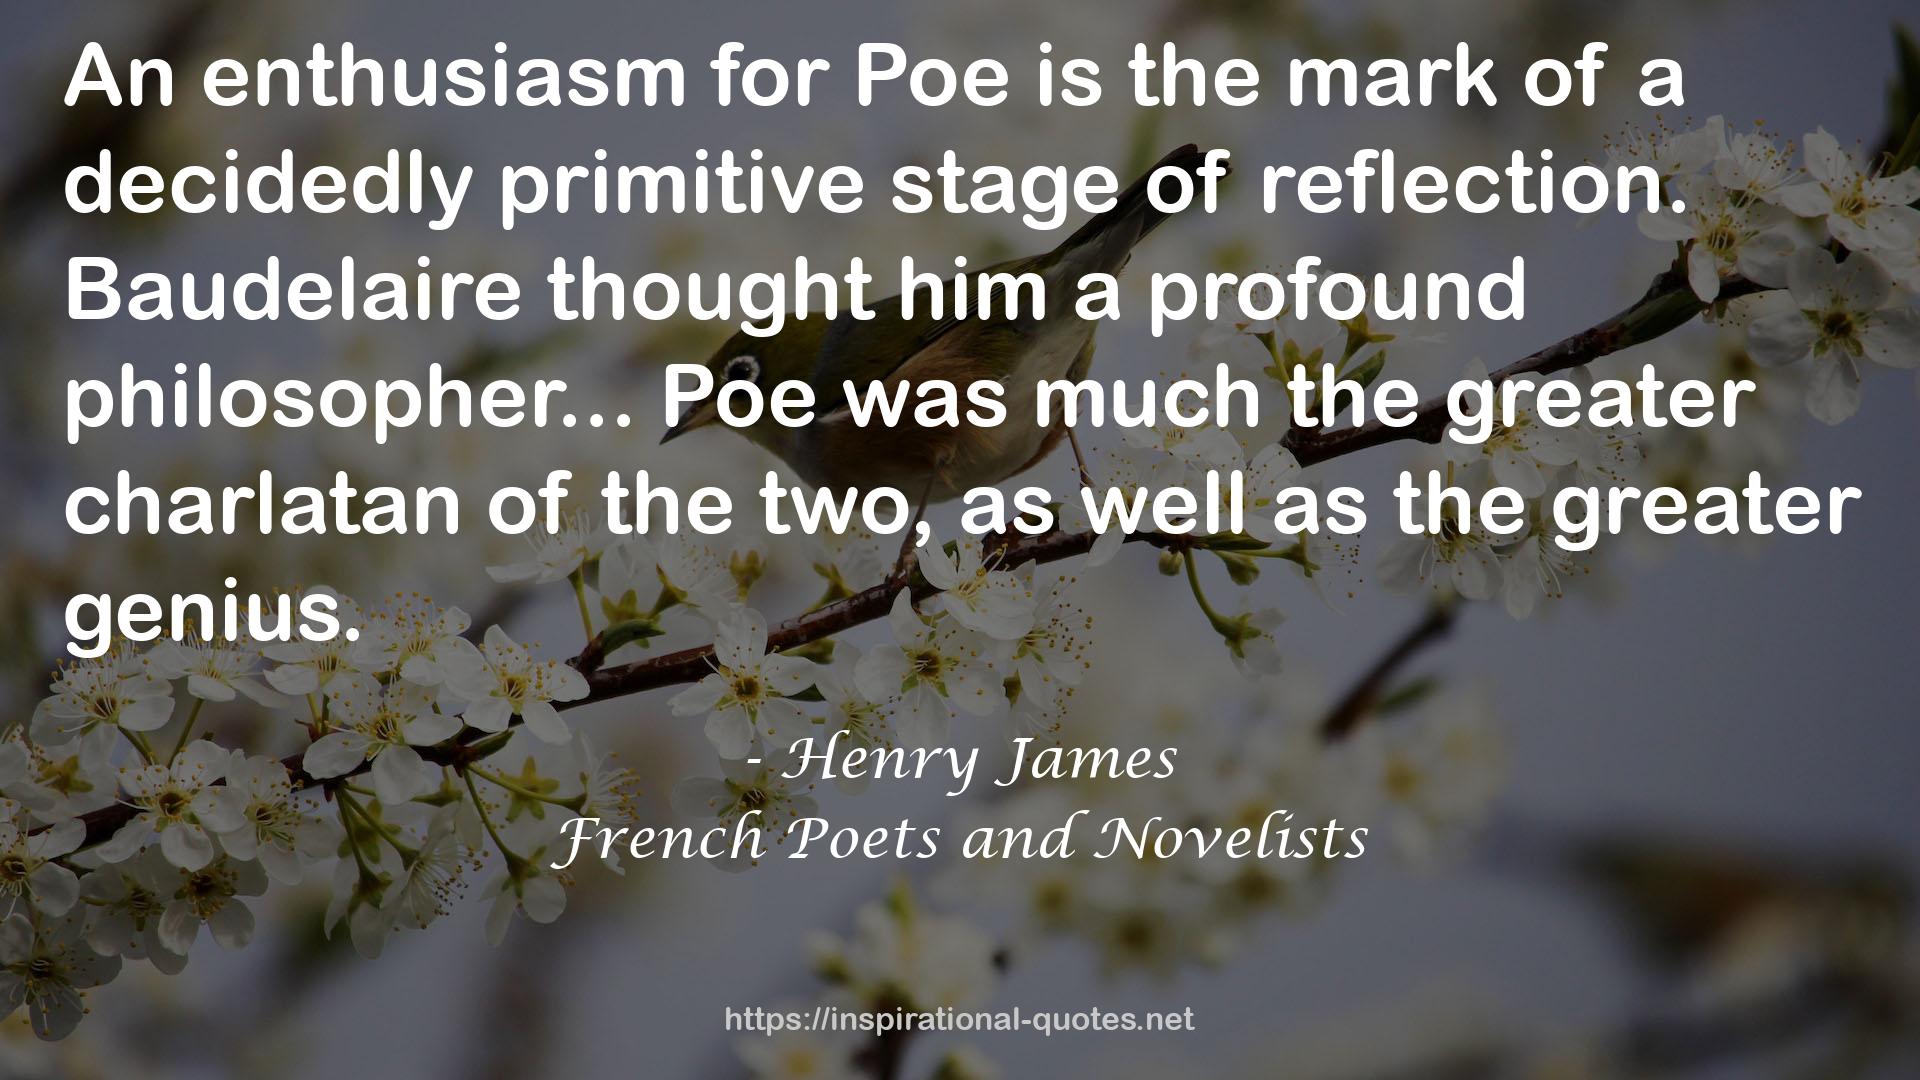 French Poets and Novelists QUOTES